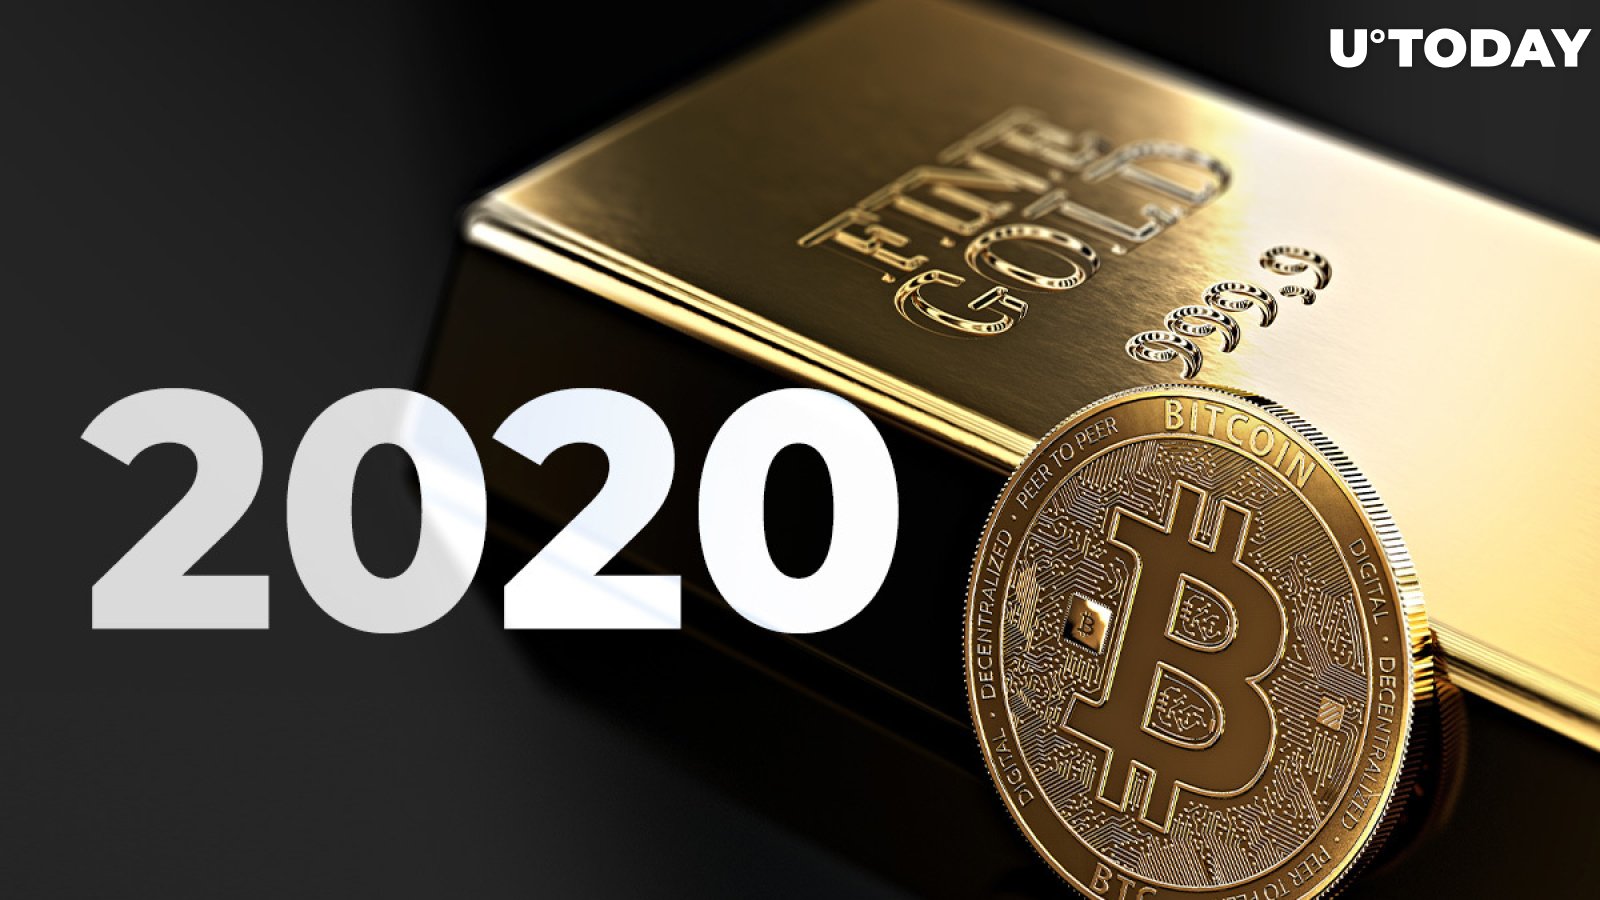 Bitcoin and Gold Top Candidates to Advance in 2020, Bloomberg Analyst Says